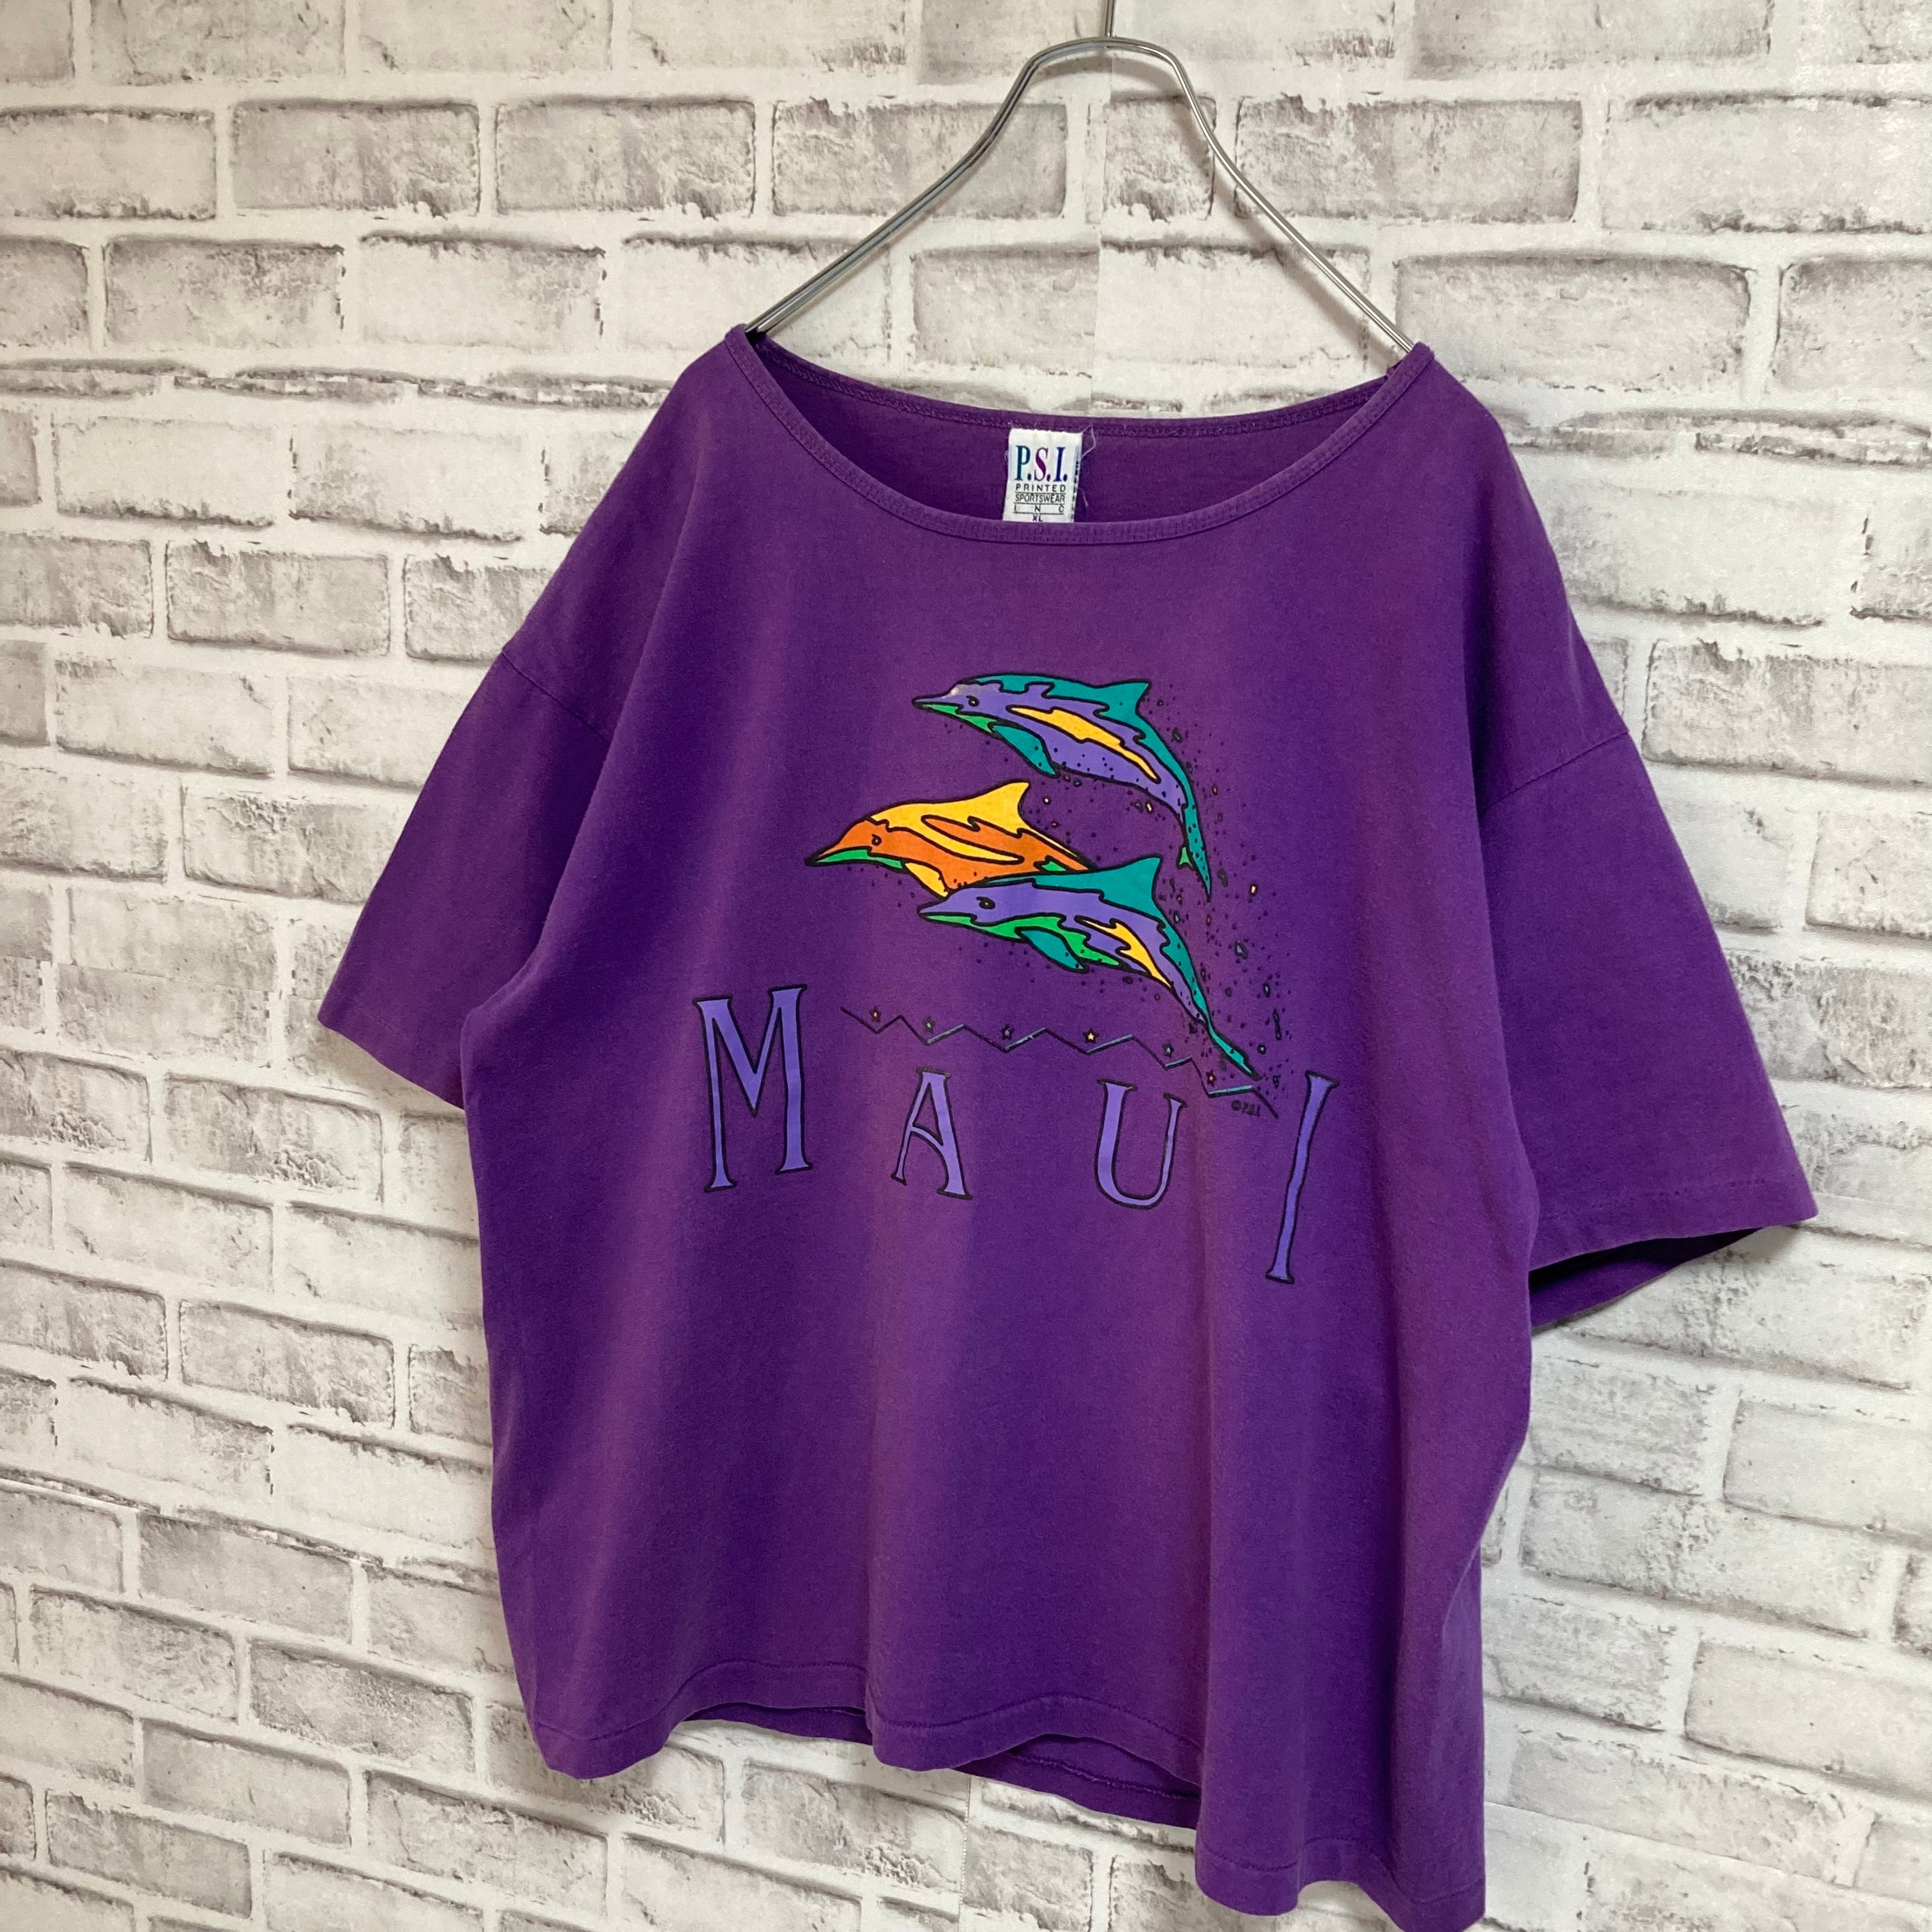 【PSI】S/S Tee L 90s Made in USA vintage Art Tee souvenir “MAUI ...